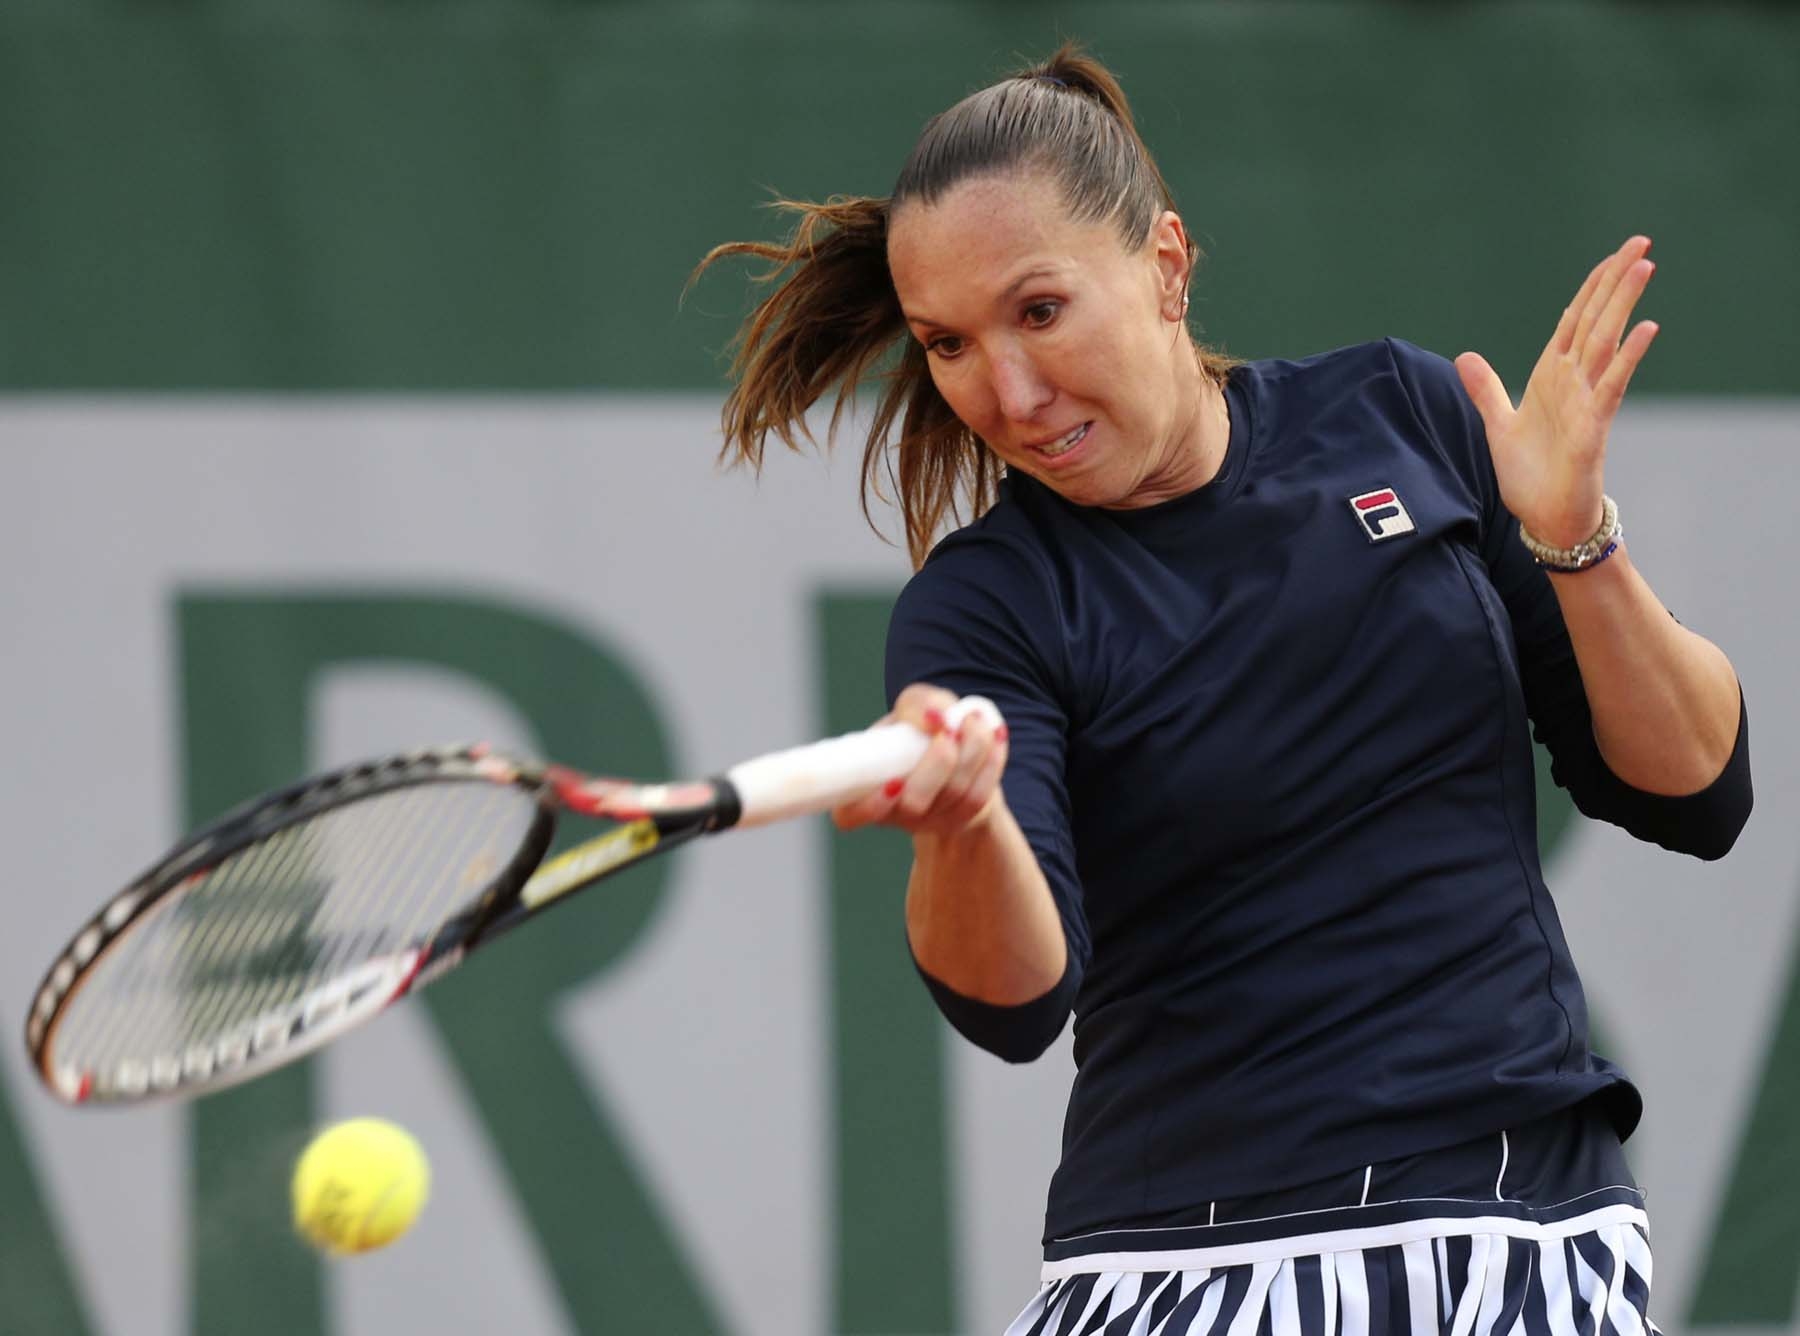 Jelena Jankovic is facing a difficult match against Cirstea